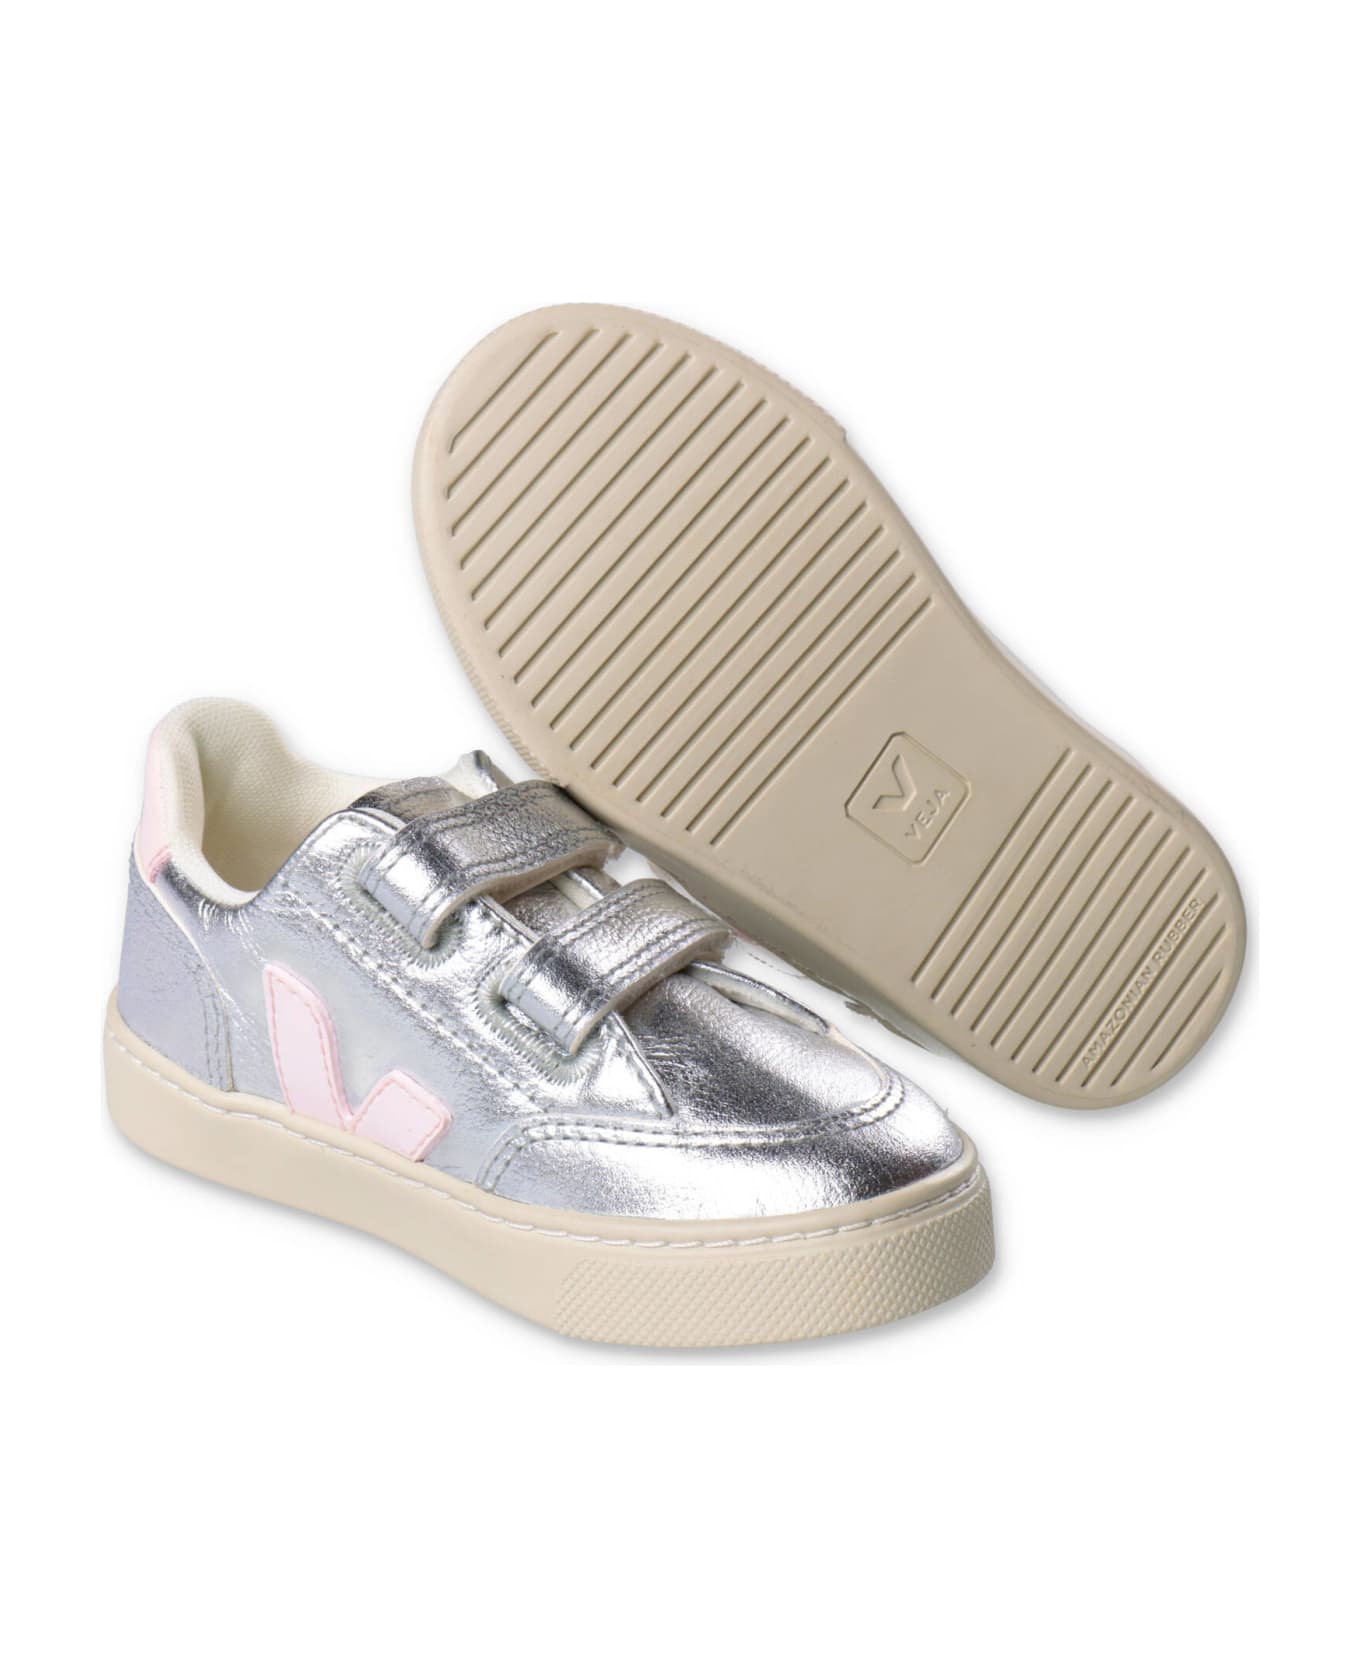 Veja Sneakers Argento In Similpelle Con Velcro Baby Girl - Argento